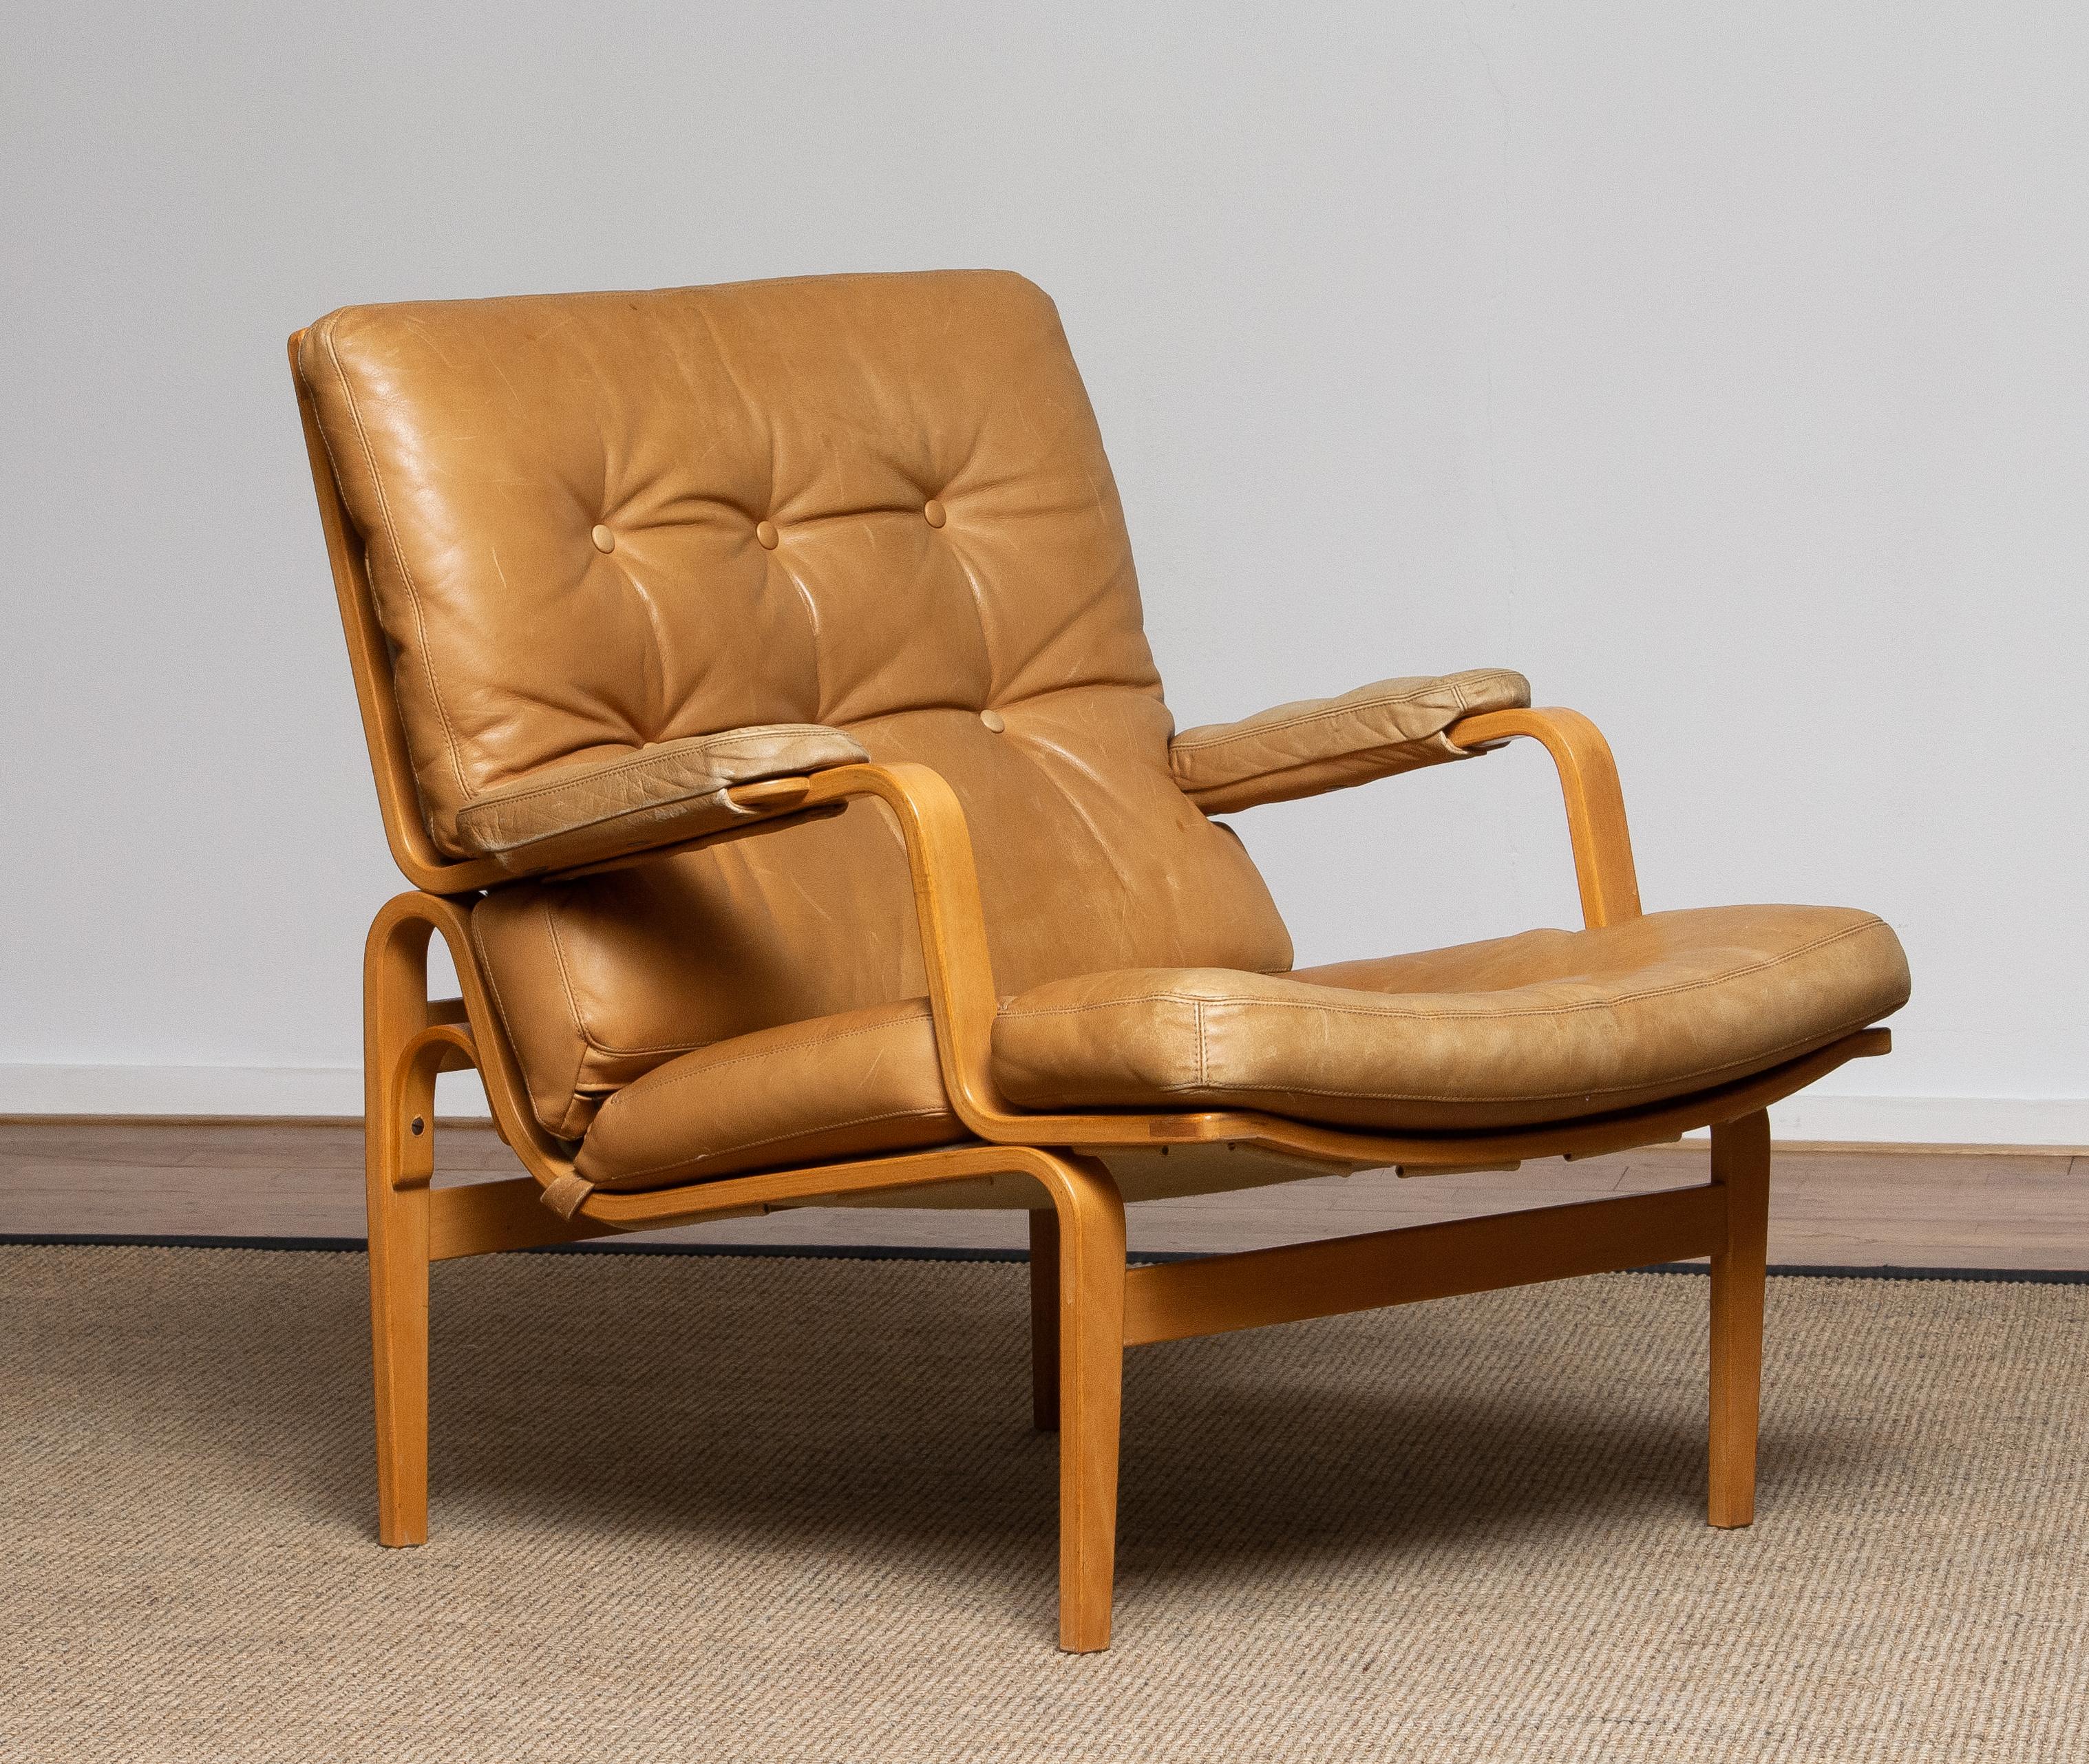 Scandinavian Modern 1960s, Beech and Leather Lounge / Easy Chair by Bruno Mathsson for DUX in Camel